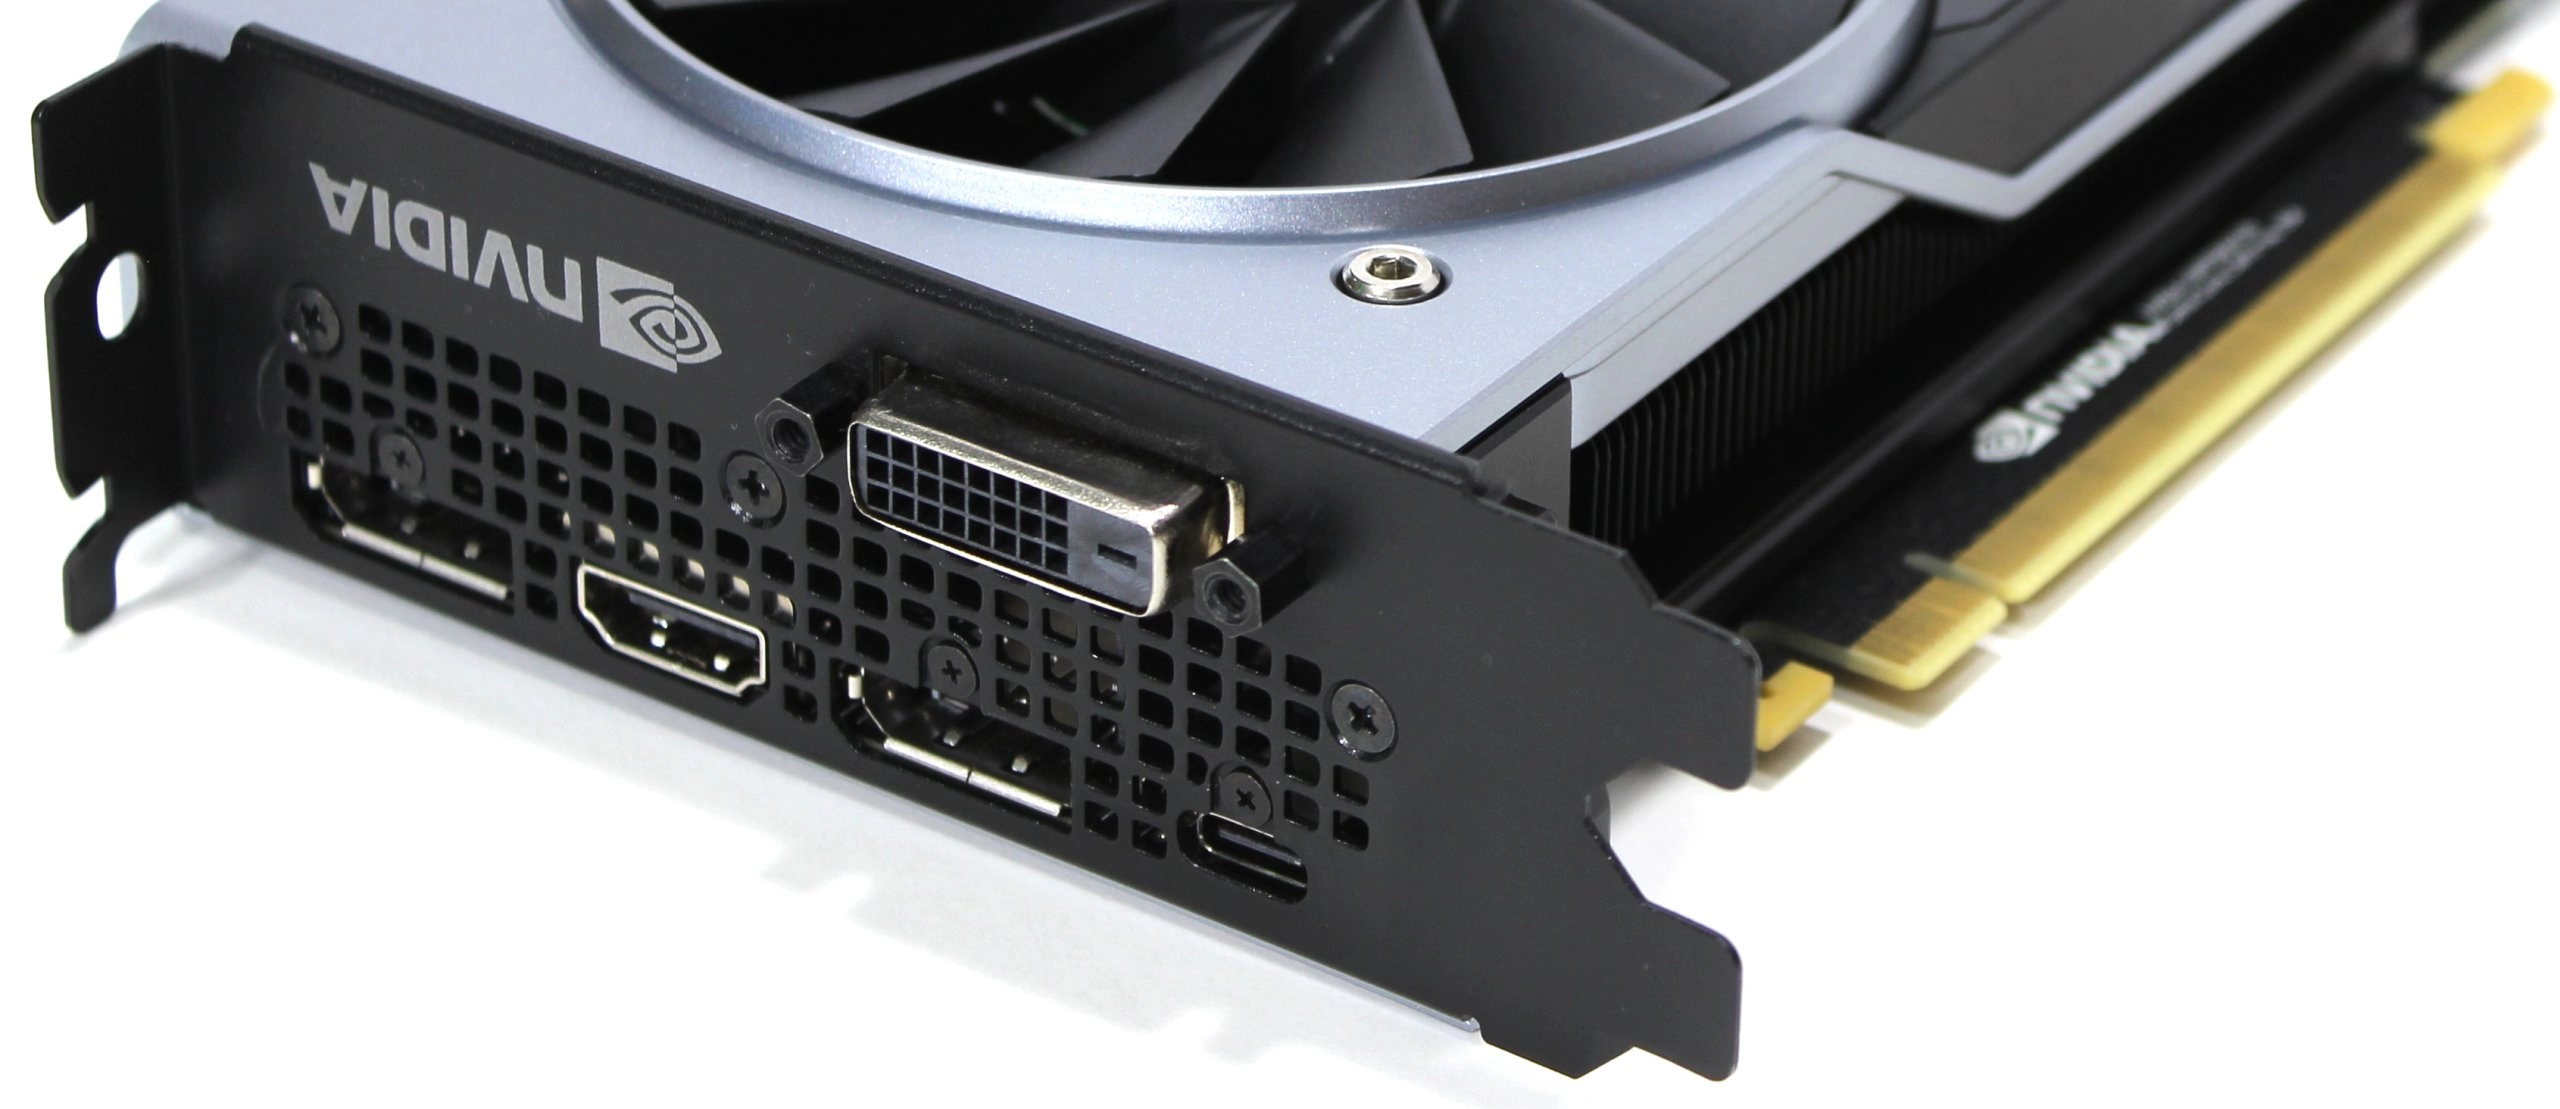 Nvidia GeForce RTX 2070 Founders Edition Left Side View